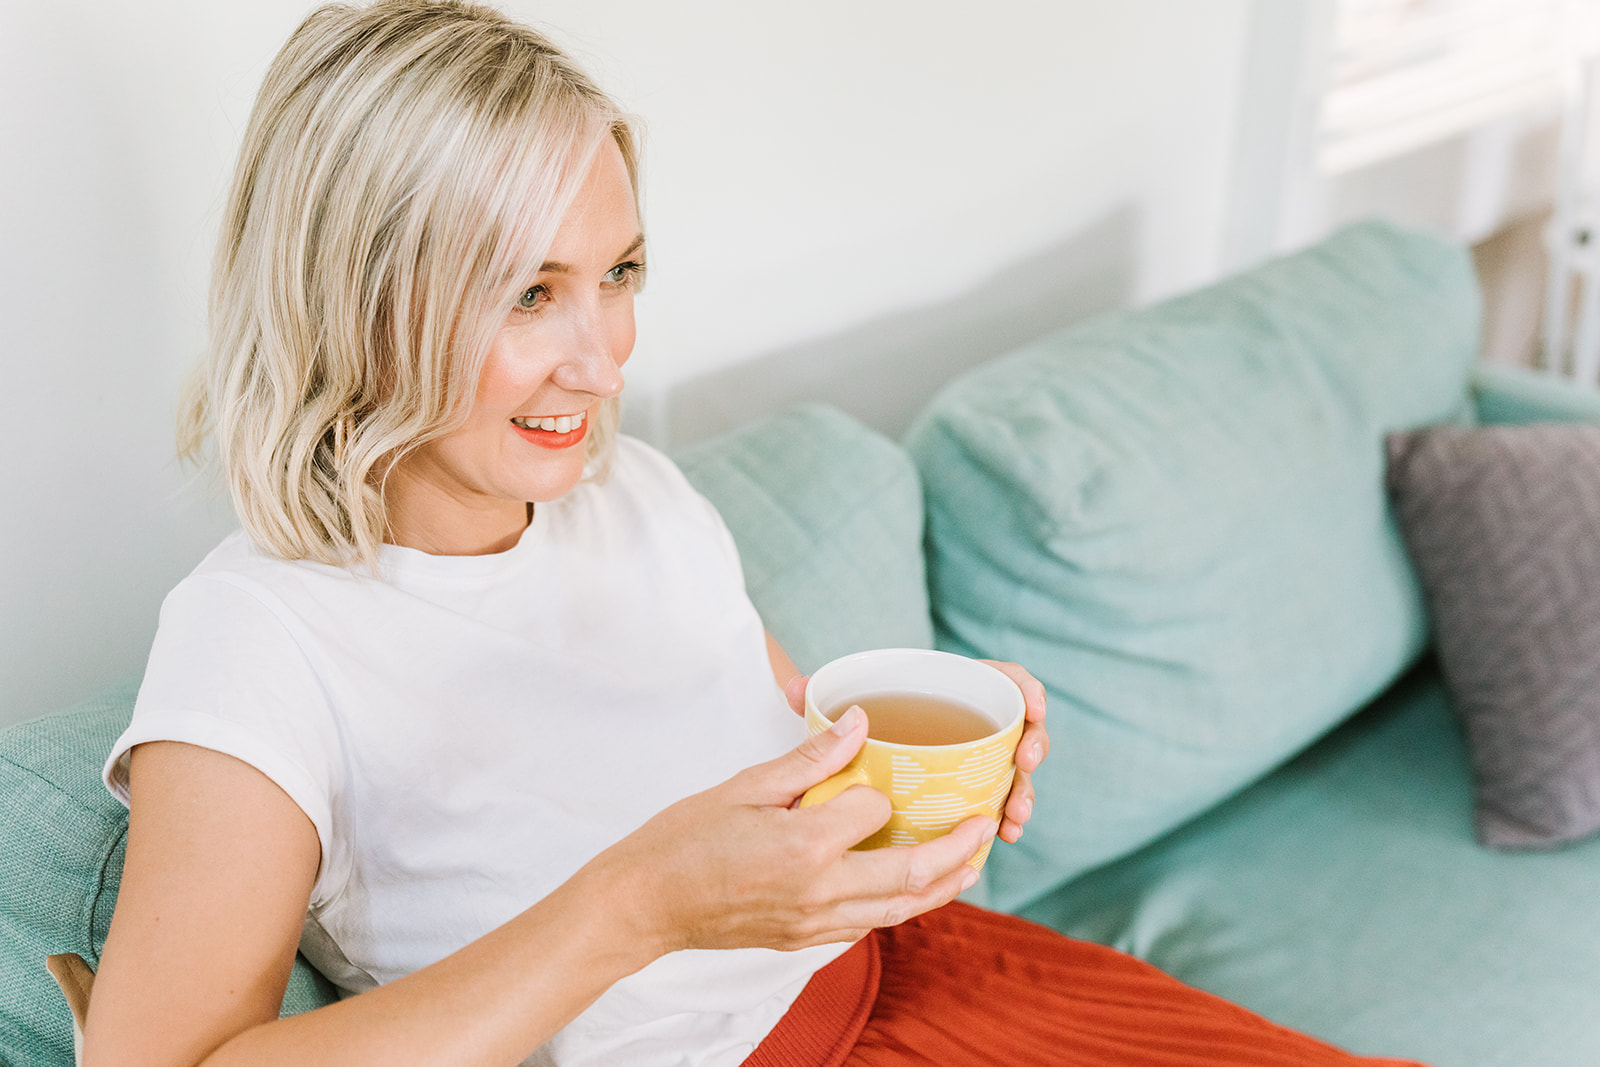 Newcastle Copywriter Kerrie Brooks wearing a white tee and rust-coloured skirt sat on a teal-coloured sofa holding a cup of tea in a yellow mug